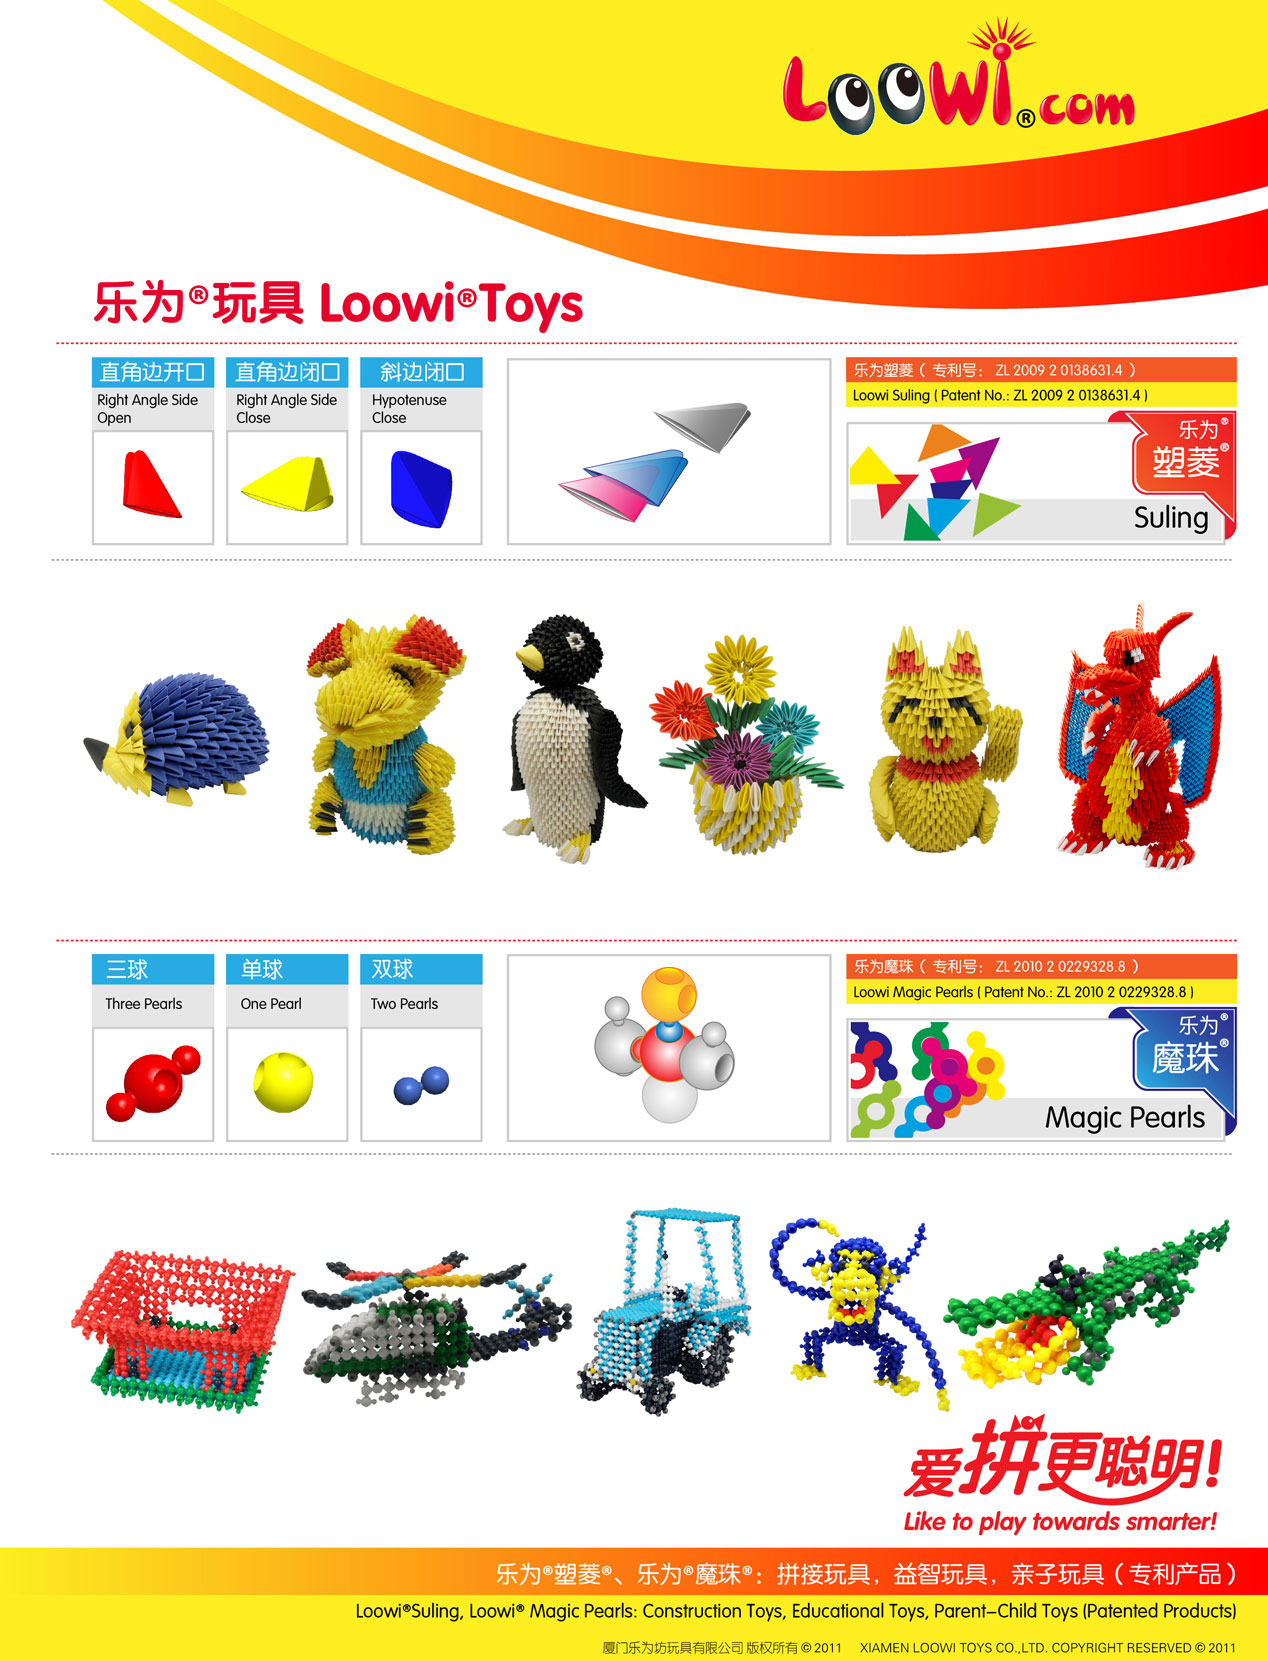 Loowi, Newly Patented, Basic Components, Construction Bricks Toys